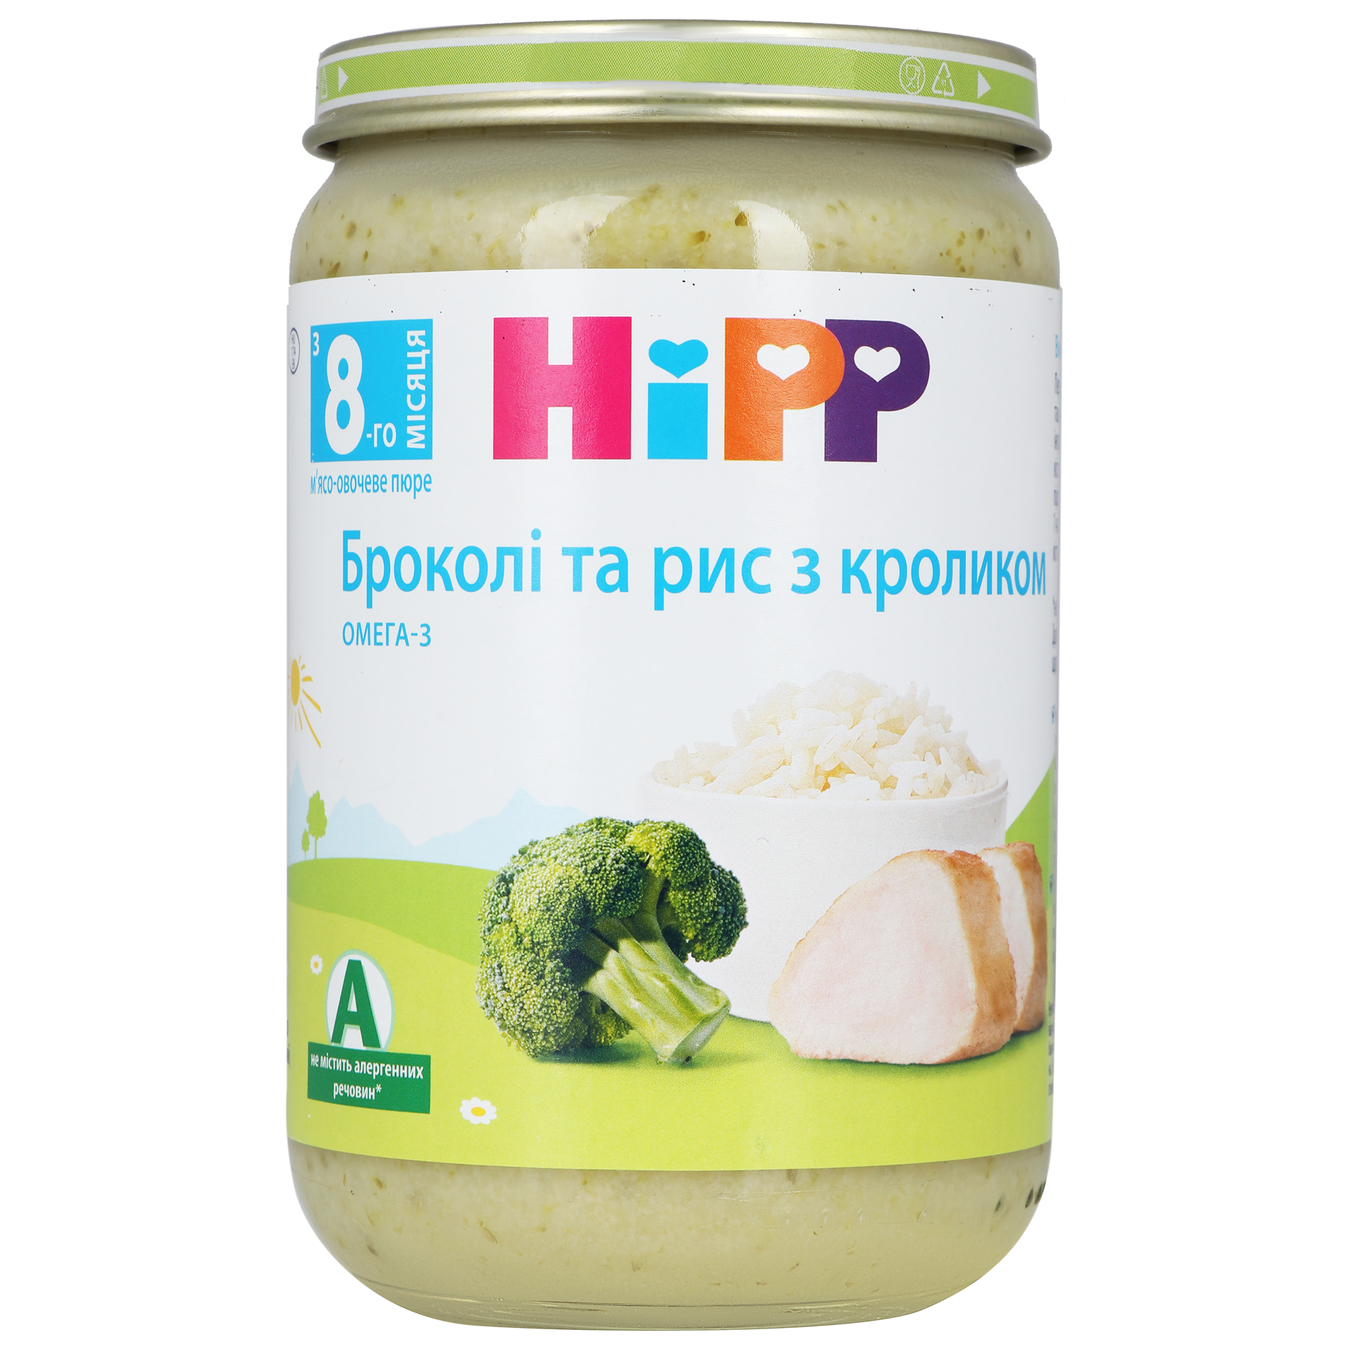 Baby puree HiPP Rabbit in broccoli puree with rice for 8+ month old babies glass jar 220g